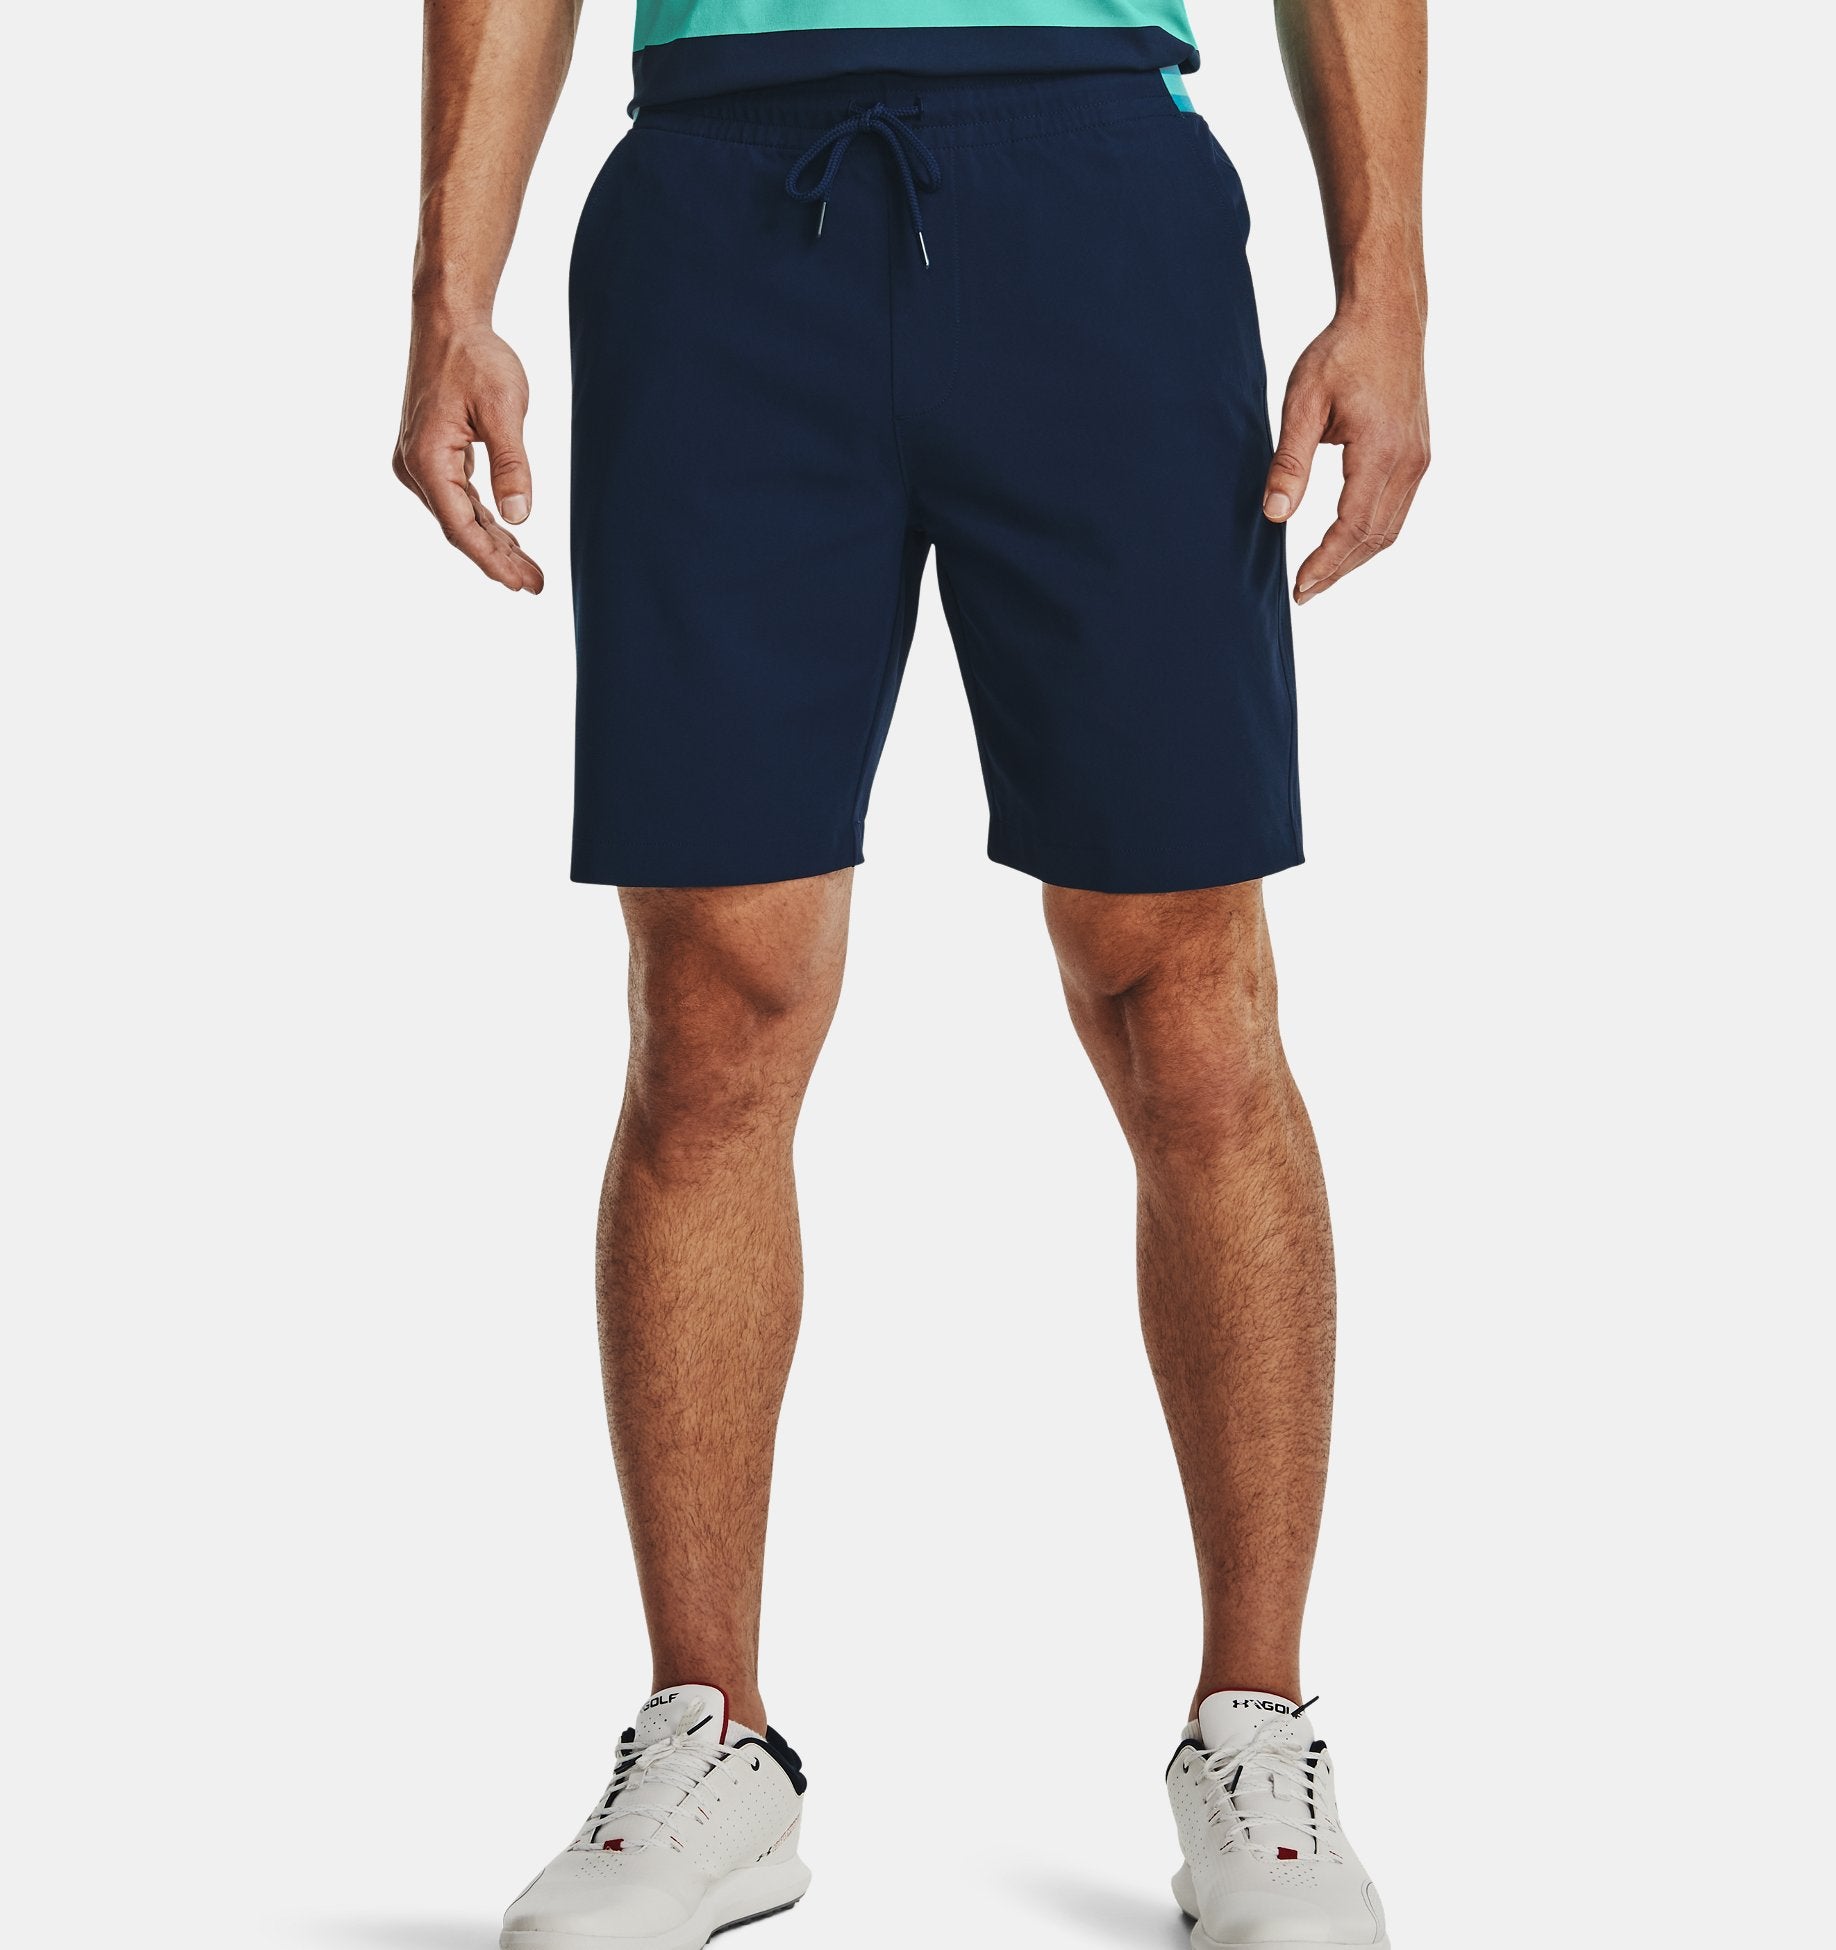 Under Armour Men's UA Drive Field Shorts - Navy (547-408) - Just